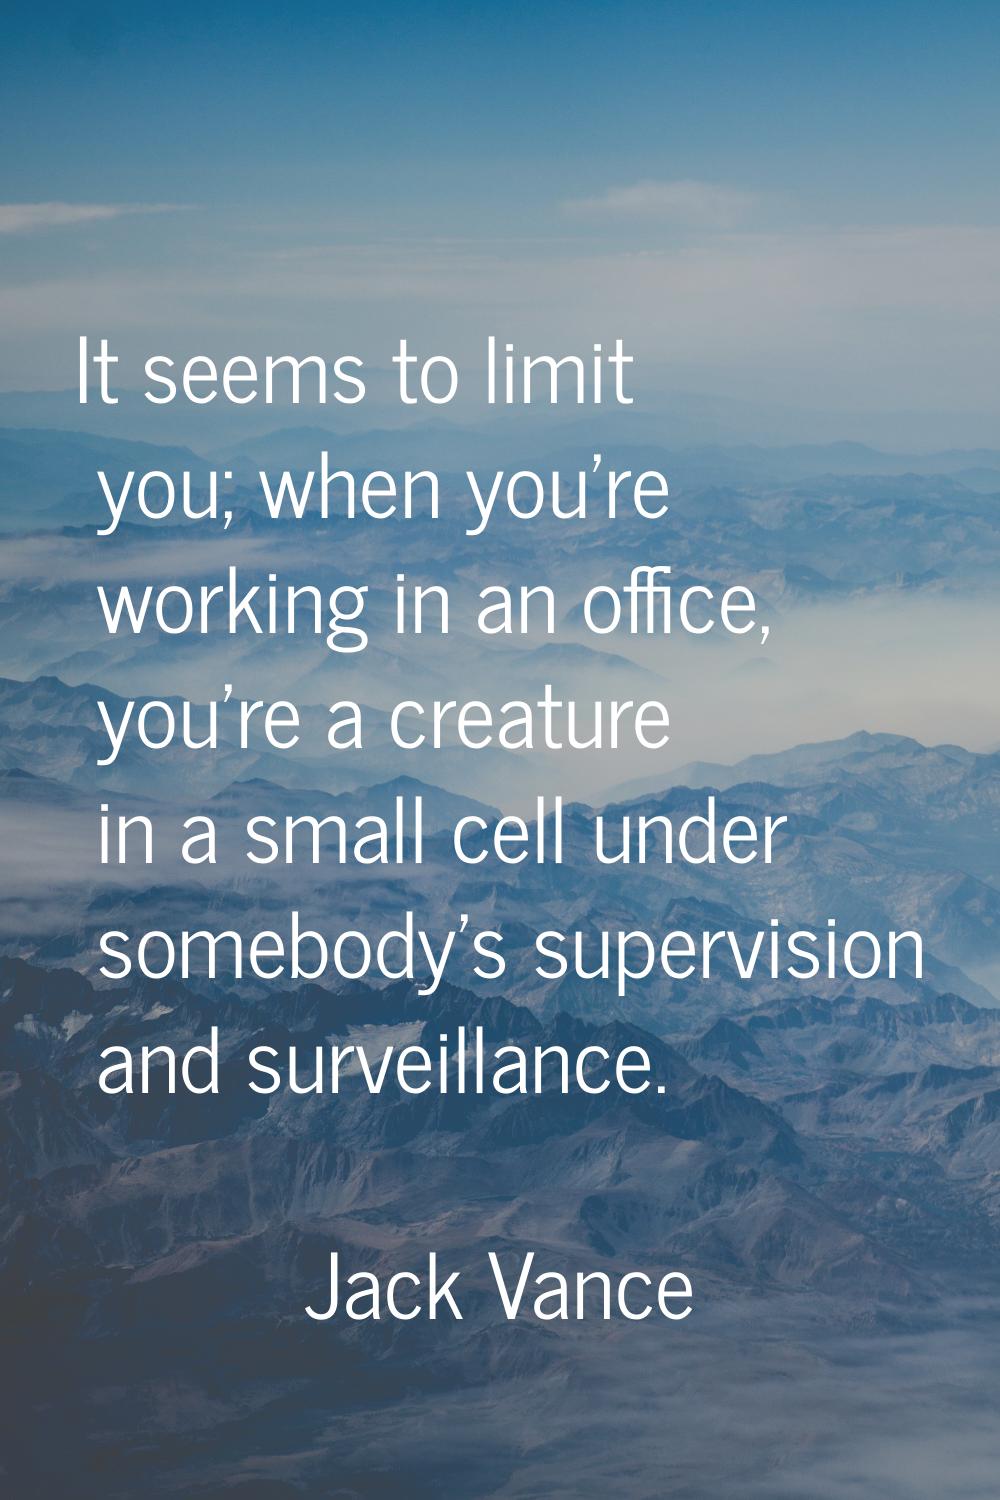 It seems to limit you; when you're working in an office, you're a creature in a small cell under so